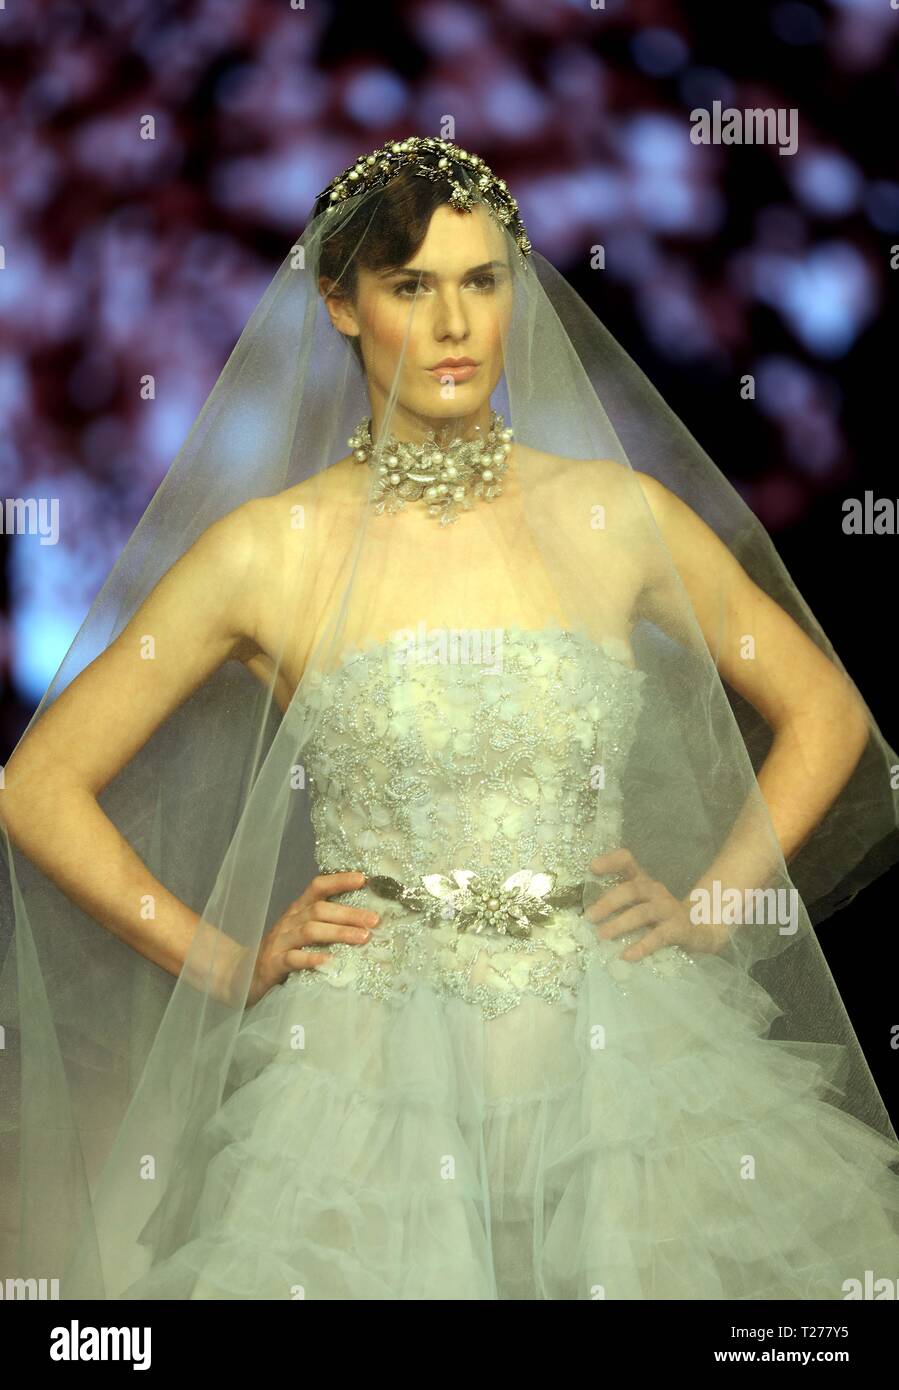 Amman, Jordan. 30th Mar, 2019. A model presents a creation on a show of Jordan Fashion Week in Amman, Jordan, on March 30, 2019. The event, which will last for two days, is the annual official fashion week of Jordan that started in 2018, supporting and promoting local designers and creators in the Jordan fashion industry. Credit: Mohammad Abu Ghosh/Xinhua/Alamy Live News Stock Photo